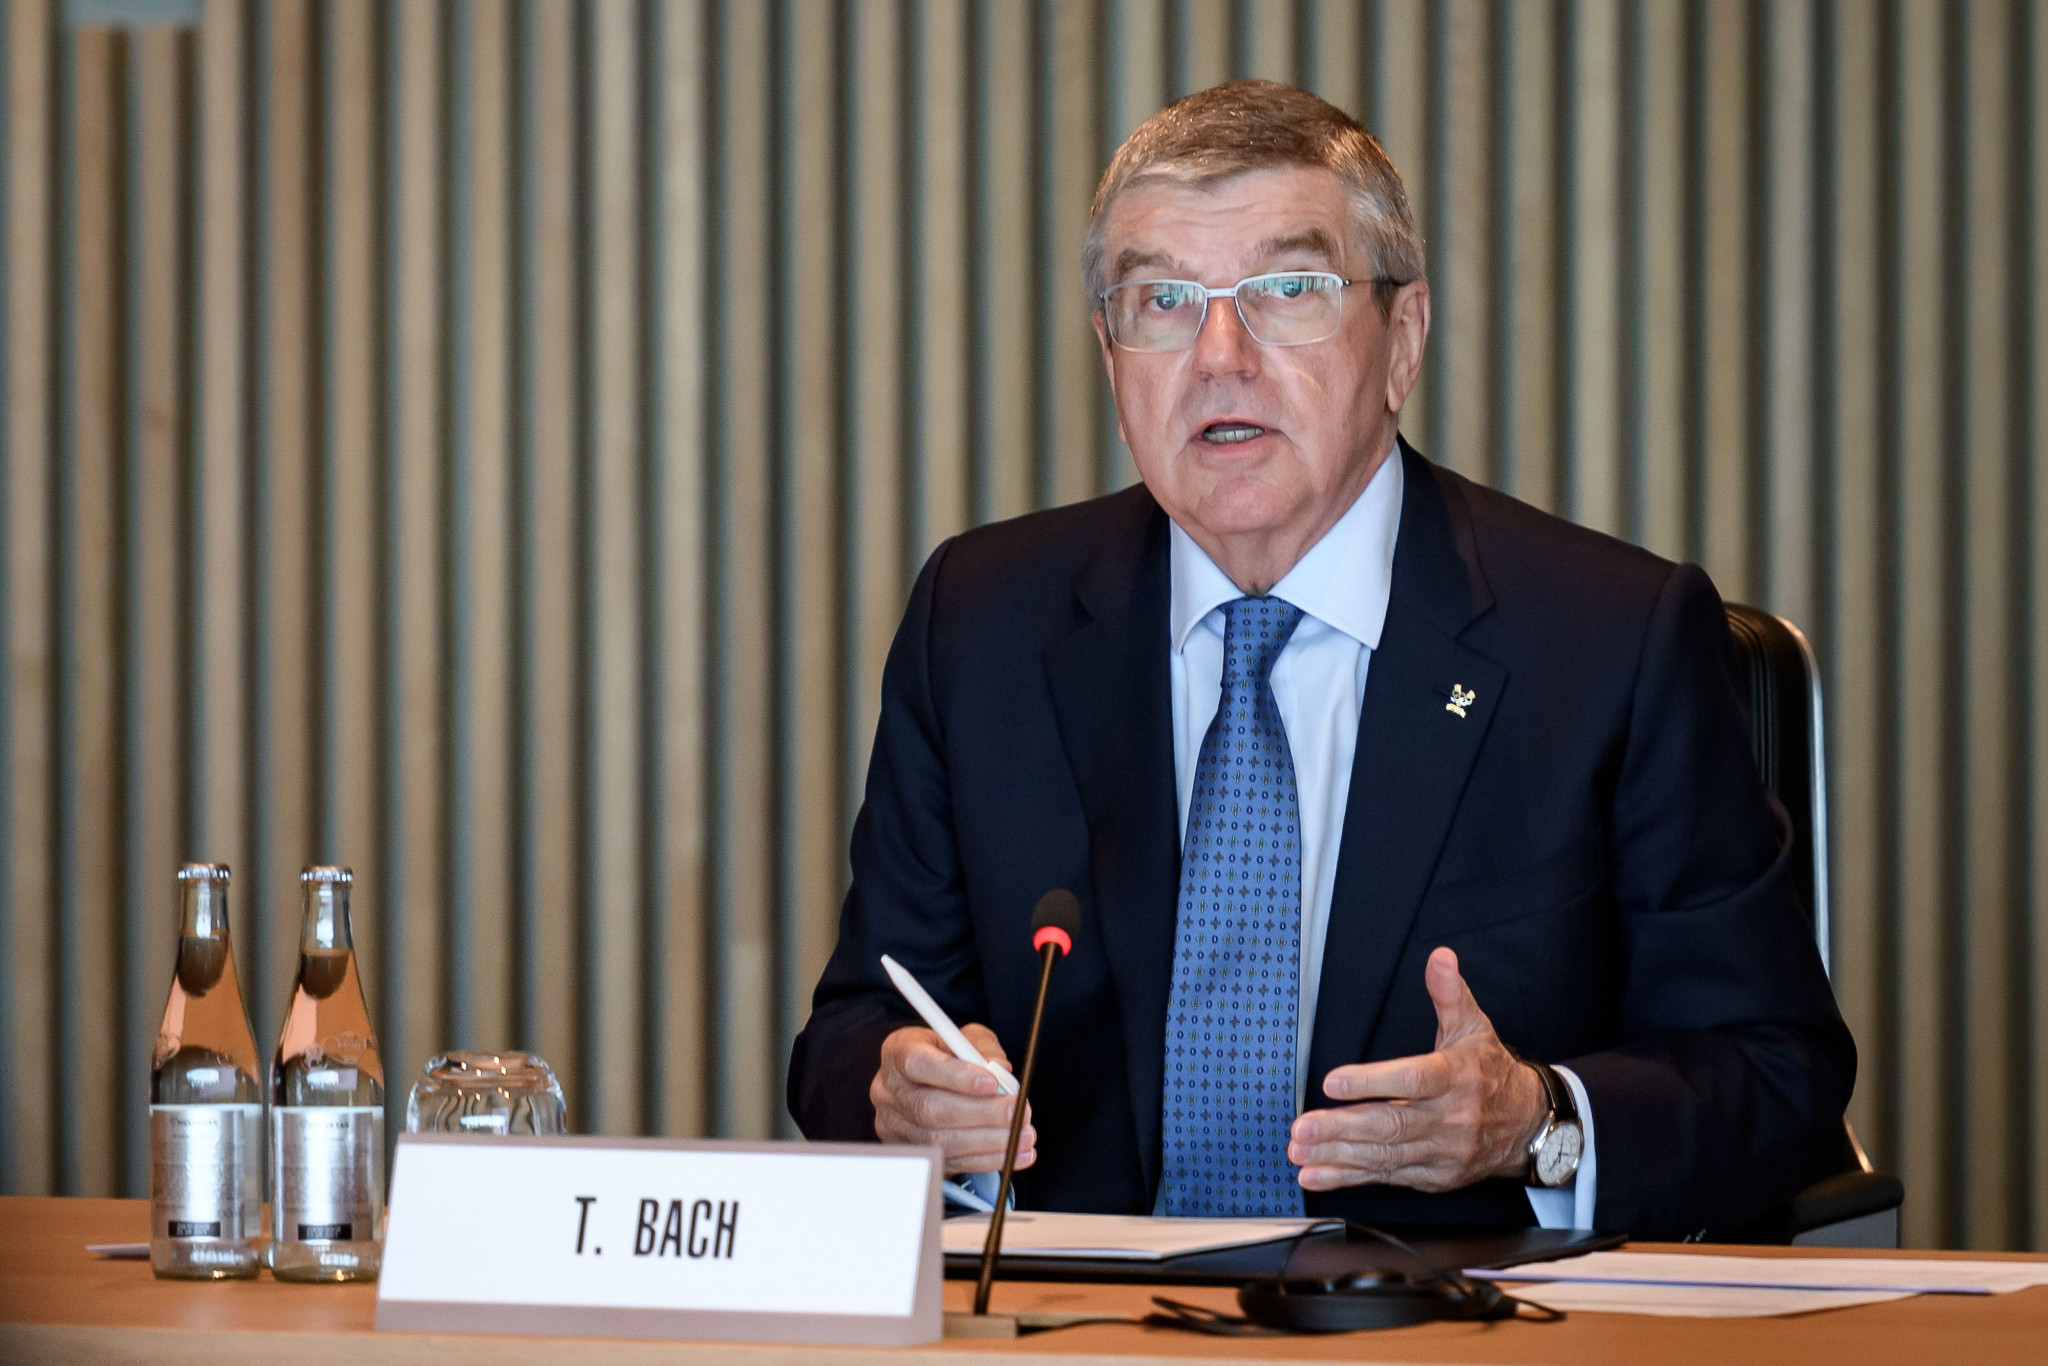 IOC President Bach does not expect countries to "opt out" of Tokyo 2020